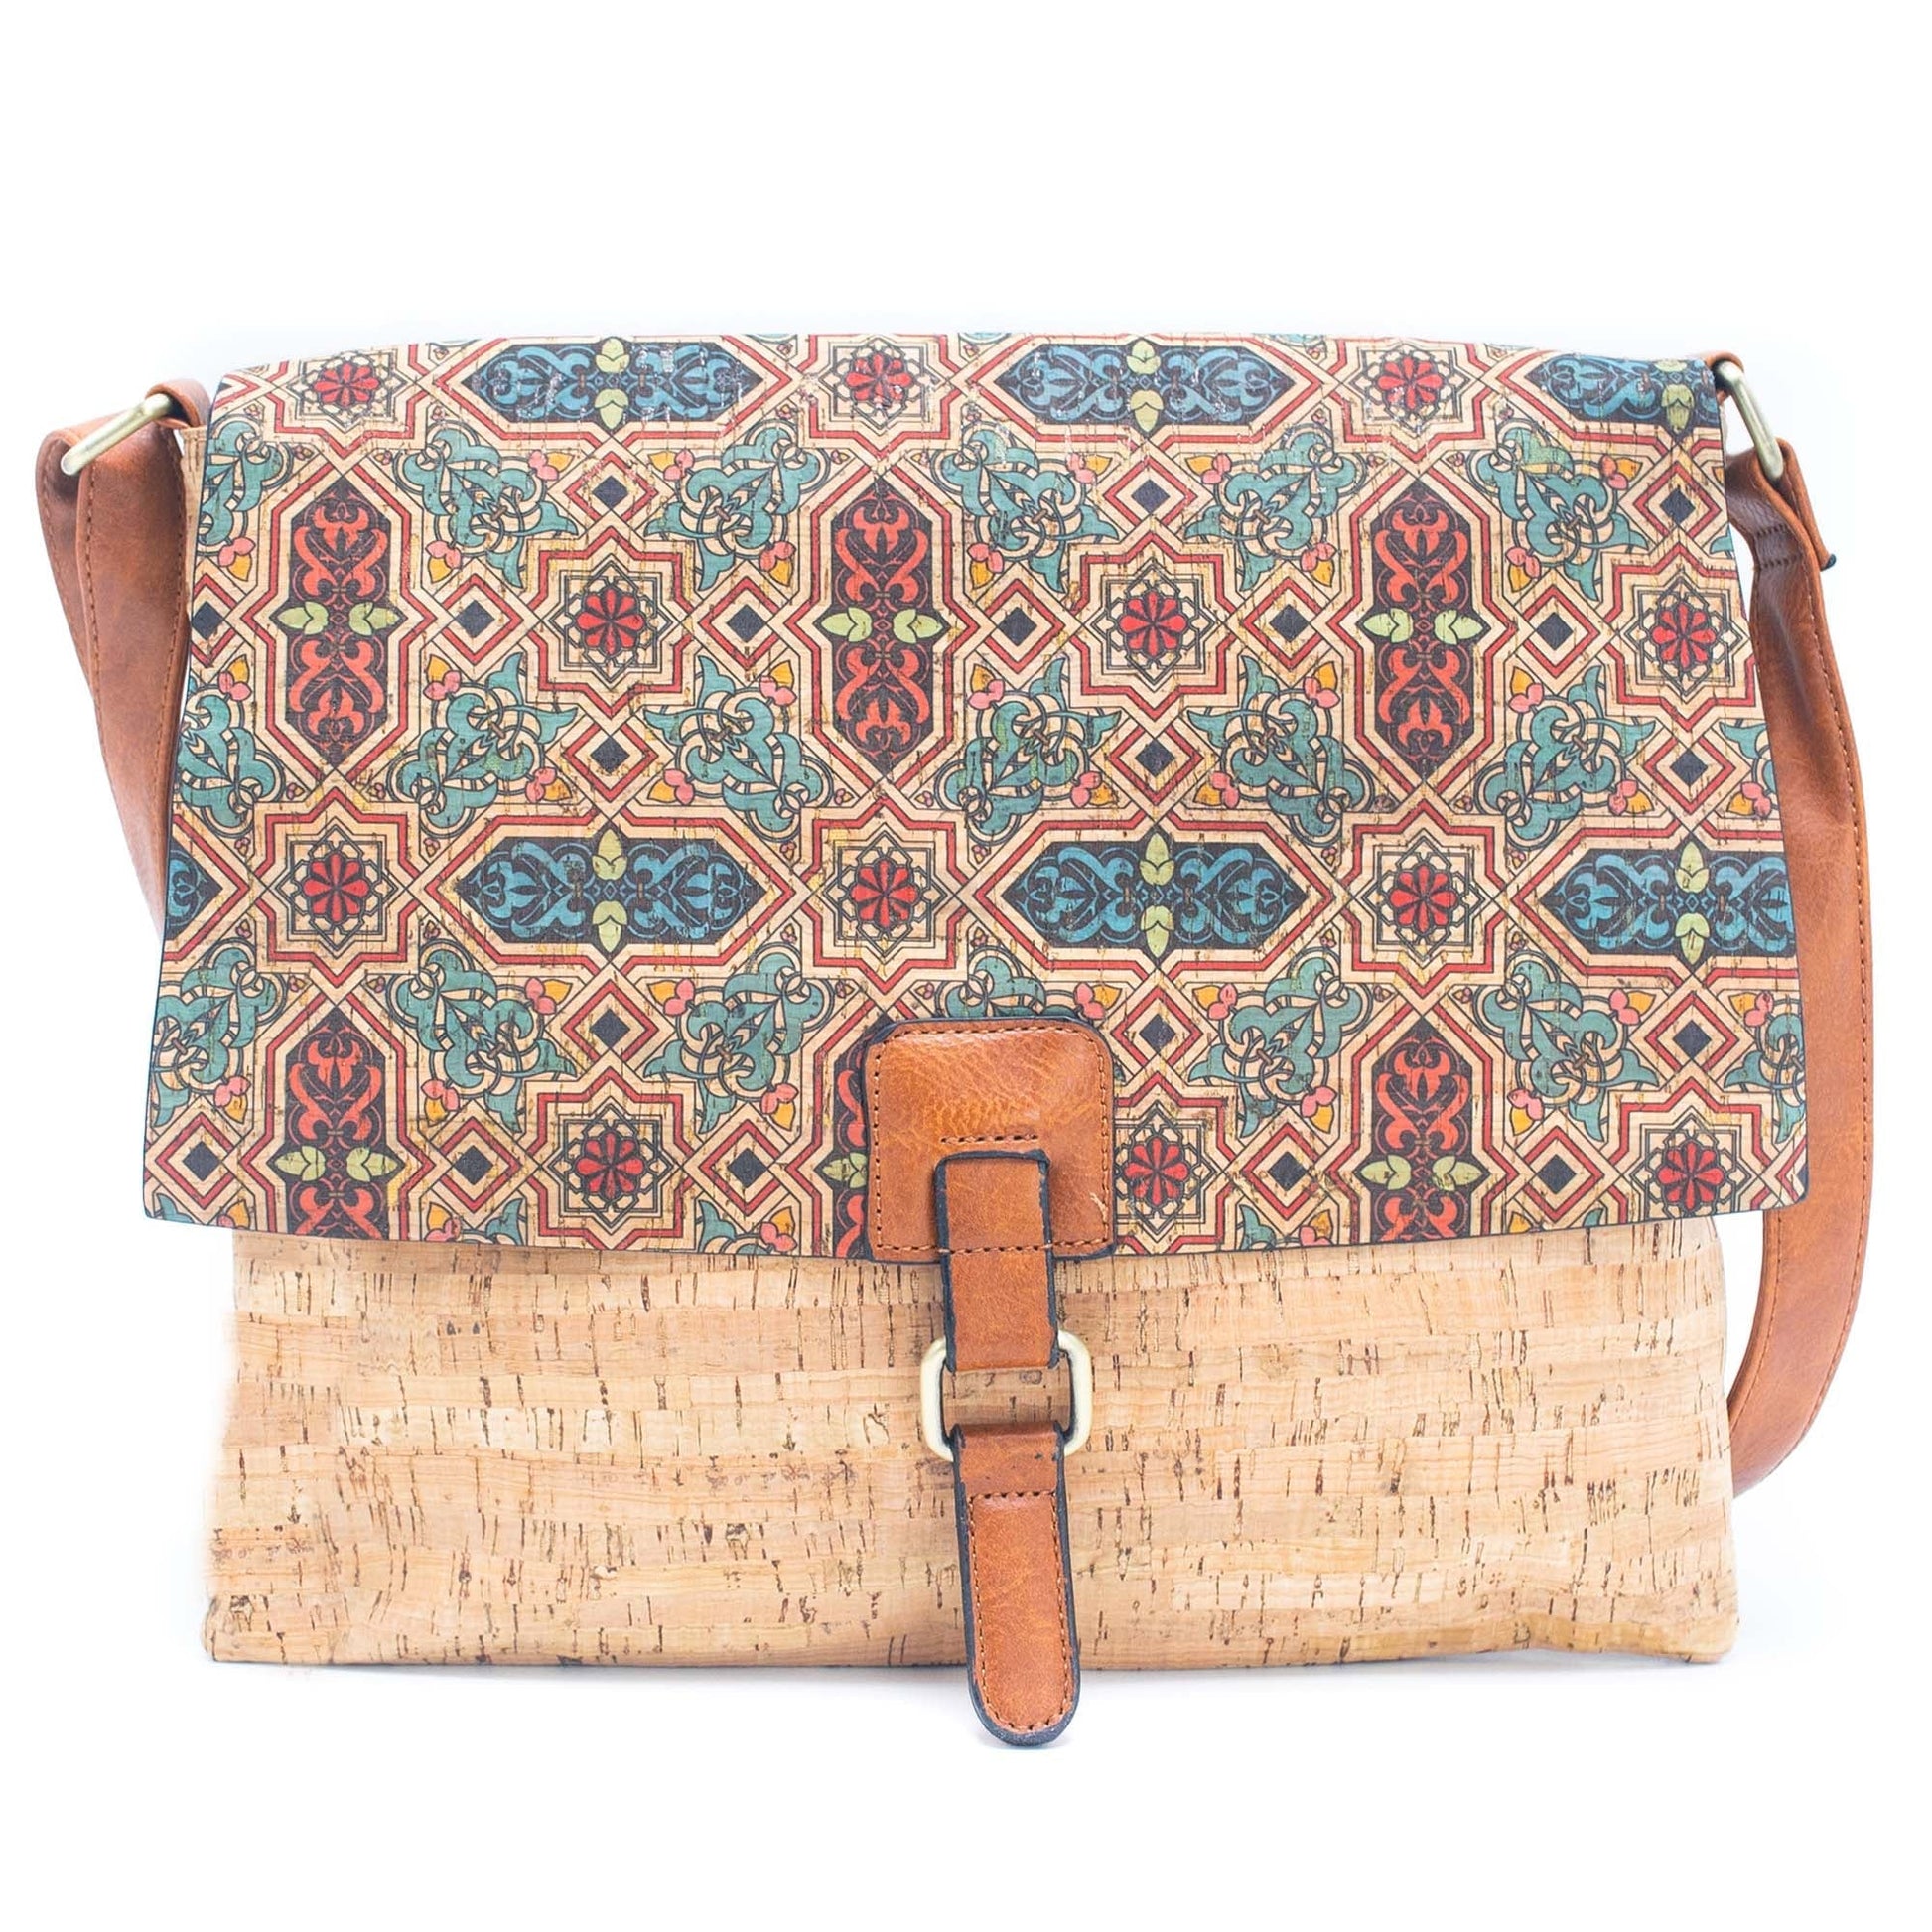 Natural Cork Crossbody Bag w/ Beautiful Patterns | THE CORK COLLECTION